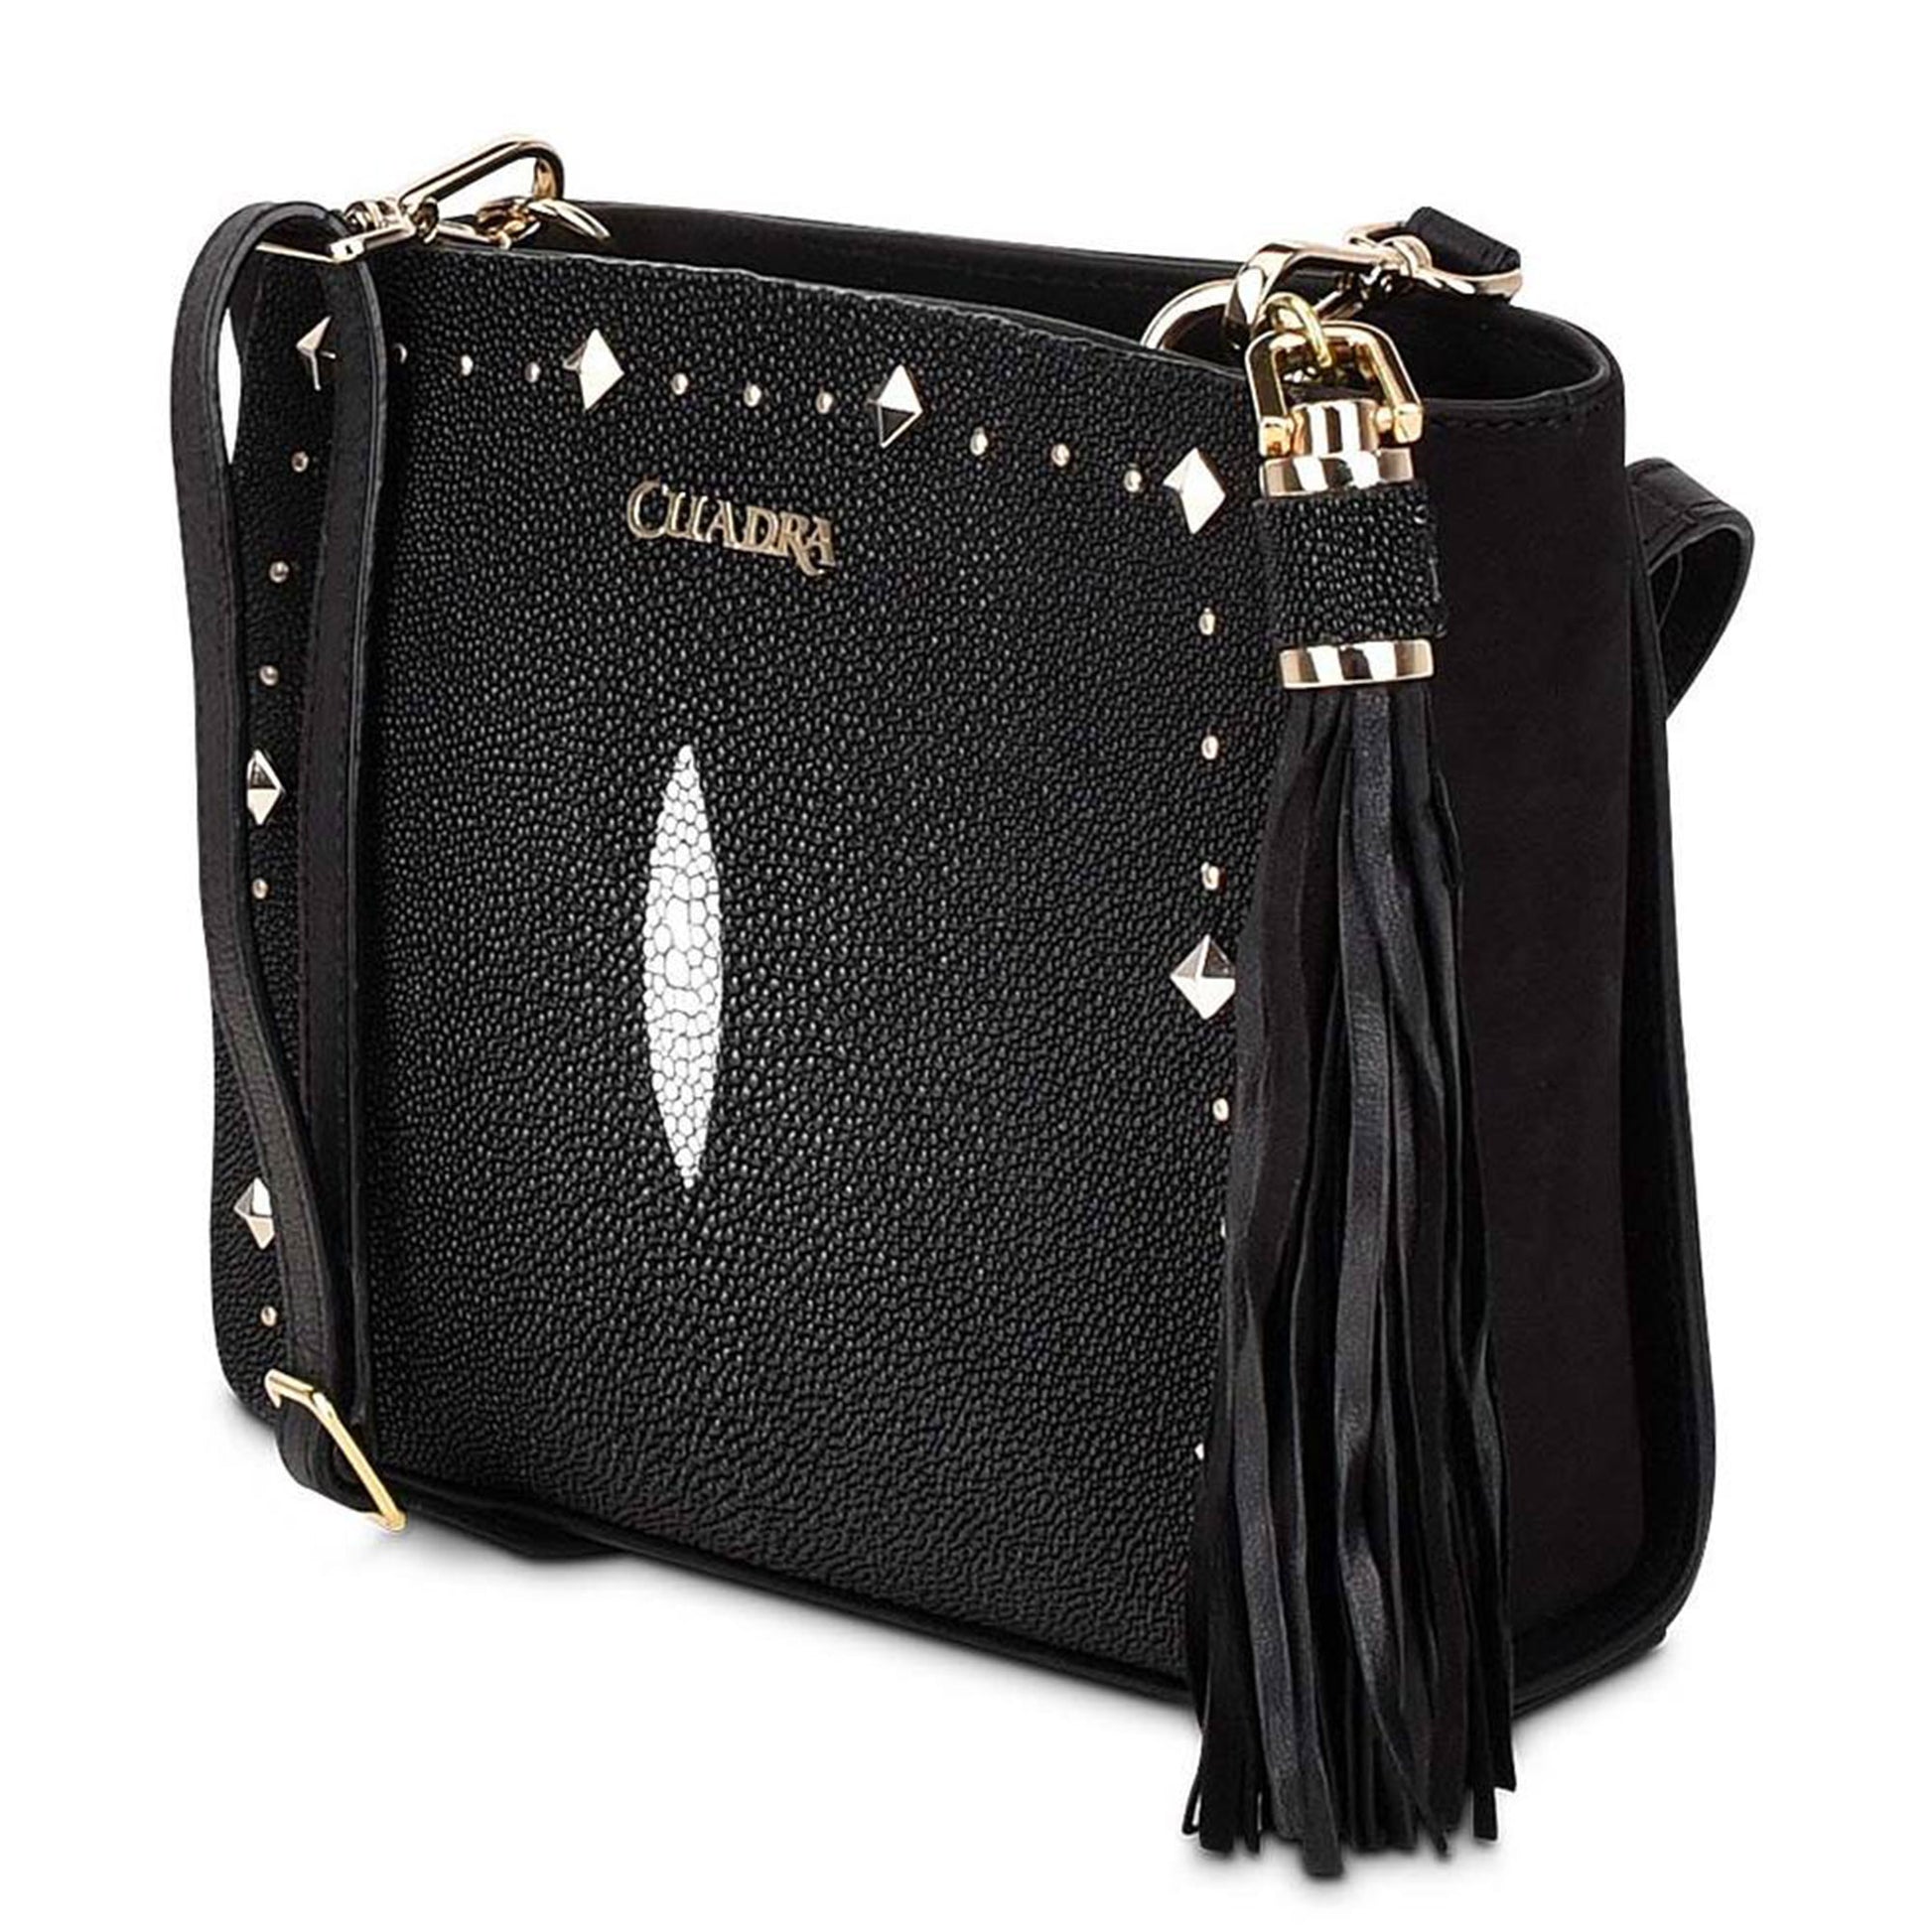 The front of the bag perfectly frames the stingray leather with fine metallic studs